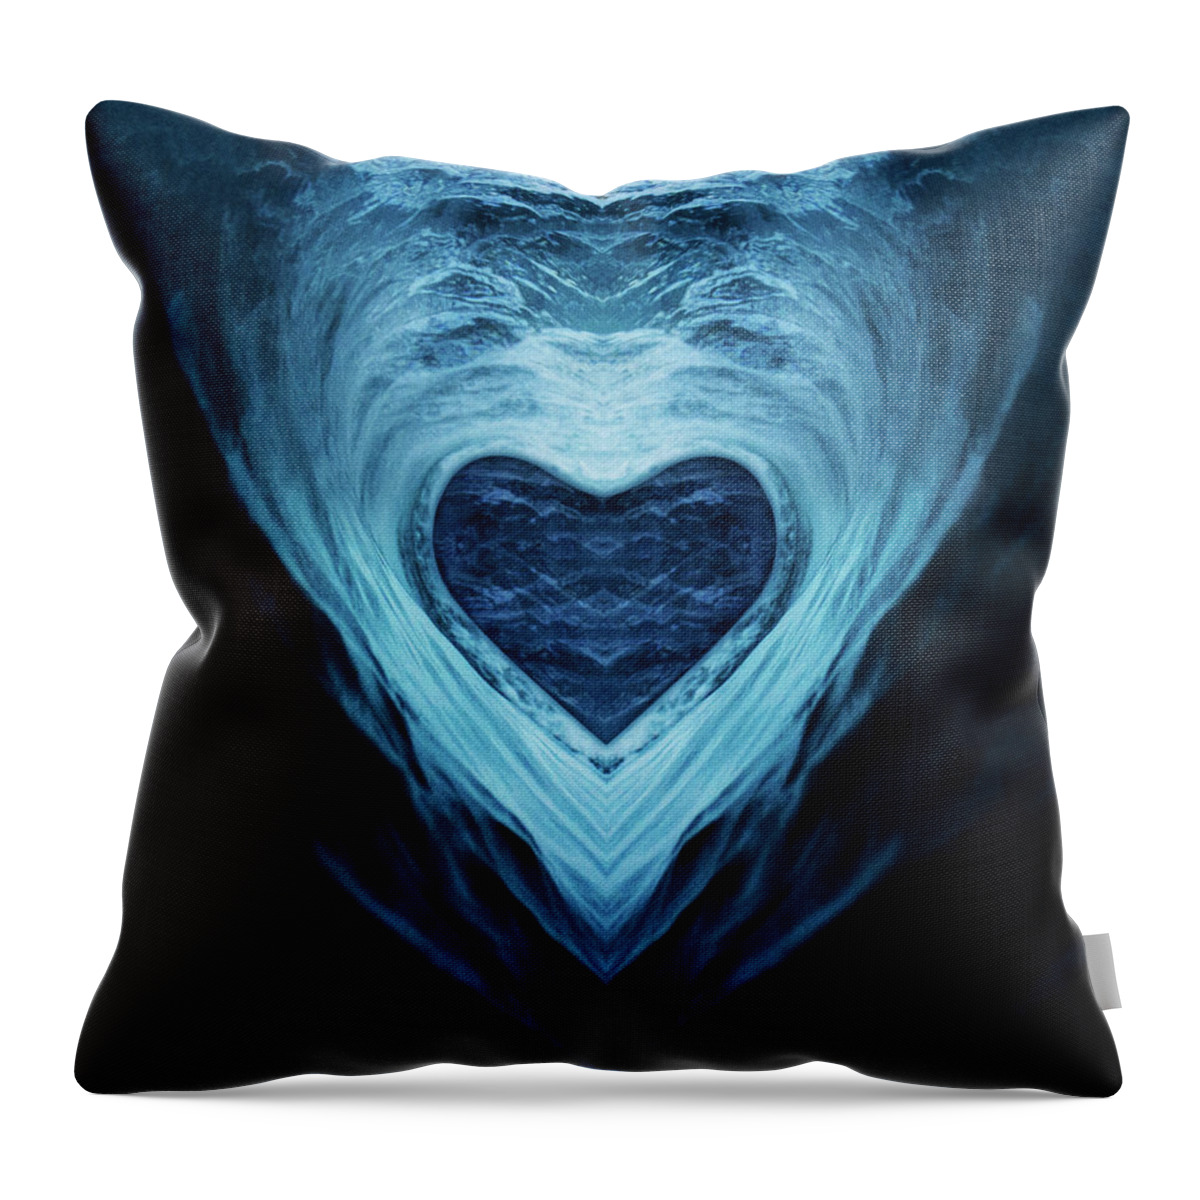 Hearts Throw Pillow featuring the digital art Heart of Ice by Pelo Blanco Photo